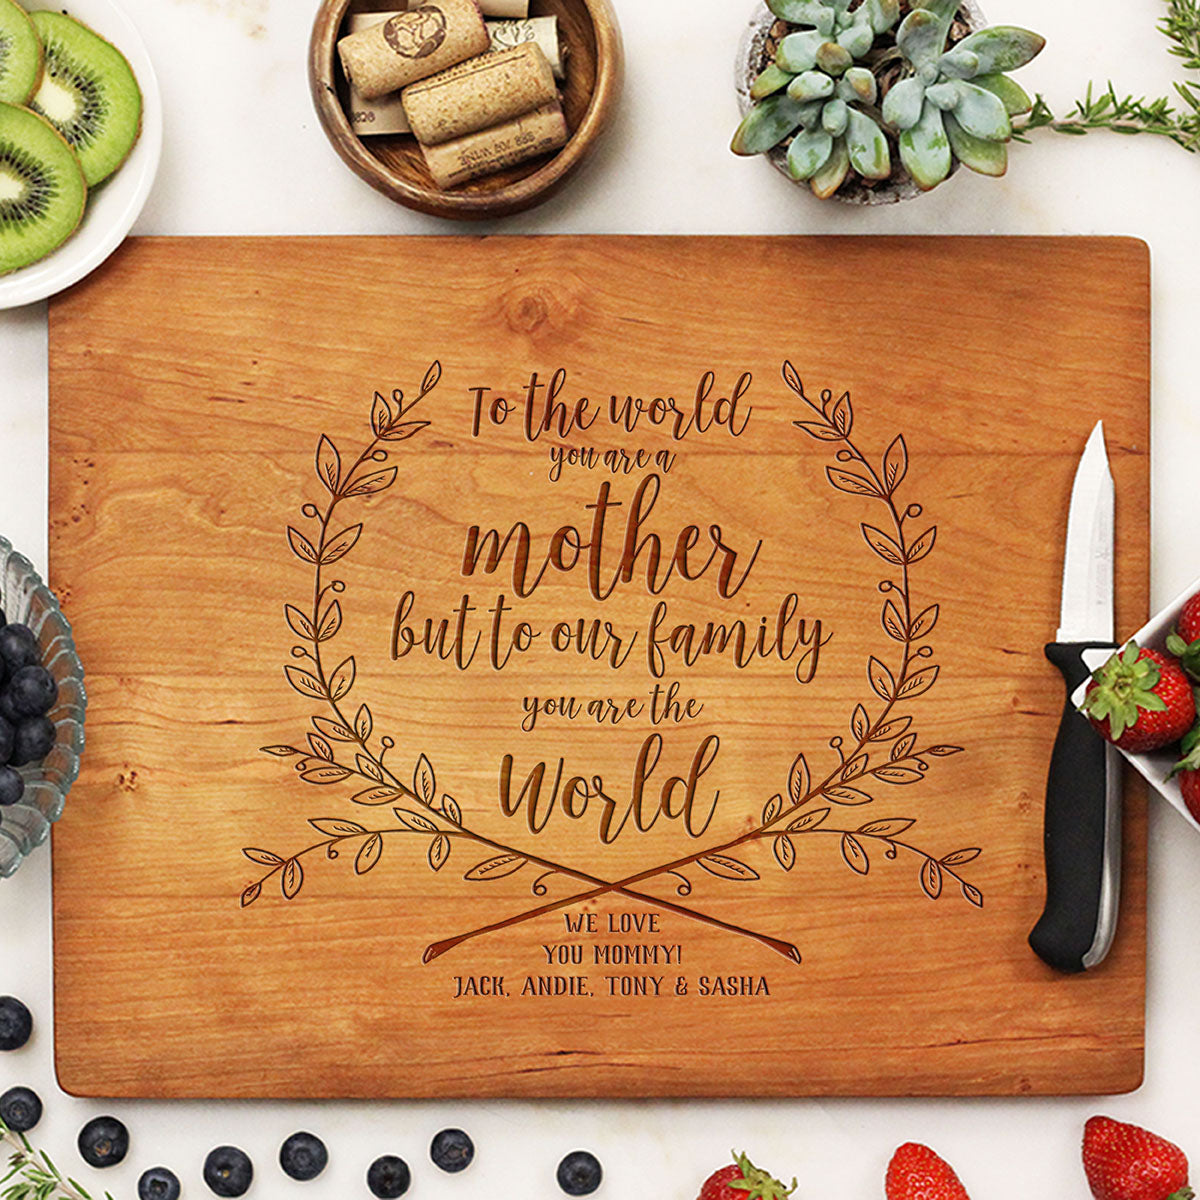 Personalized Wooden Cutting Board For Mother's Day – Stamp Out